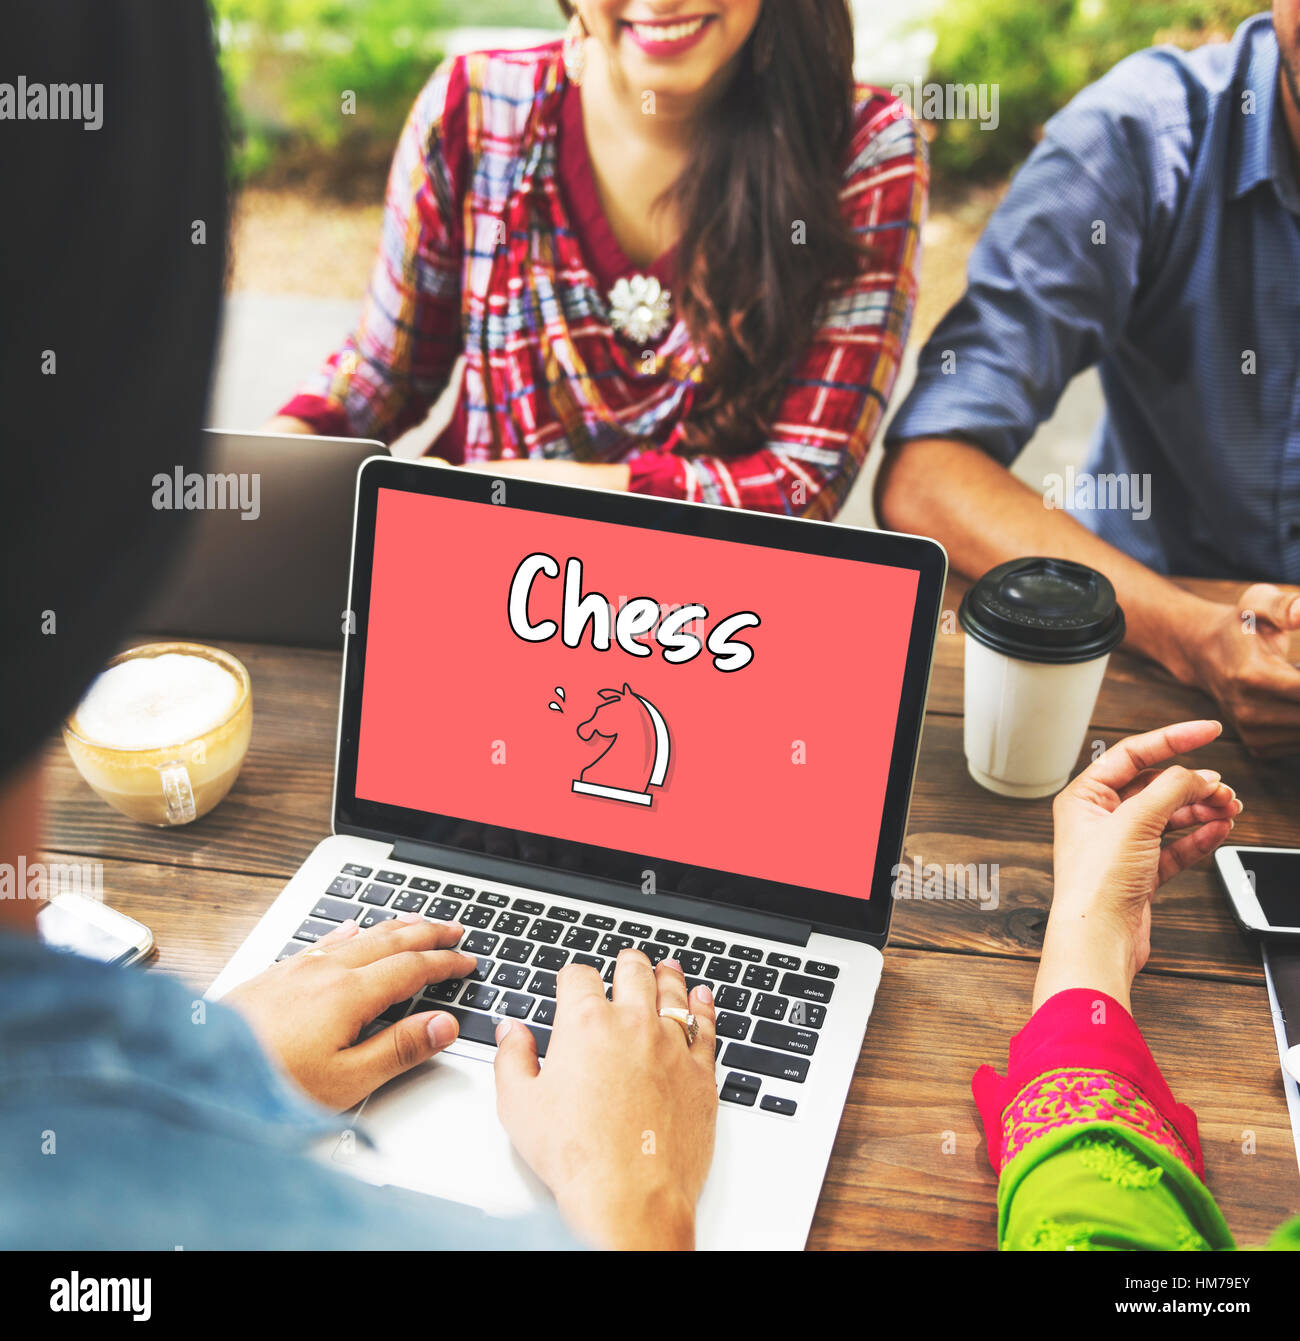 Chess Logic Game Concept Stock Photo